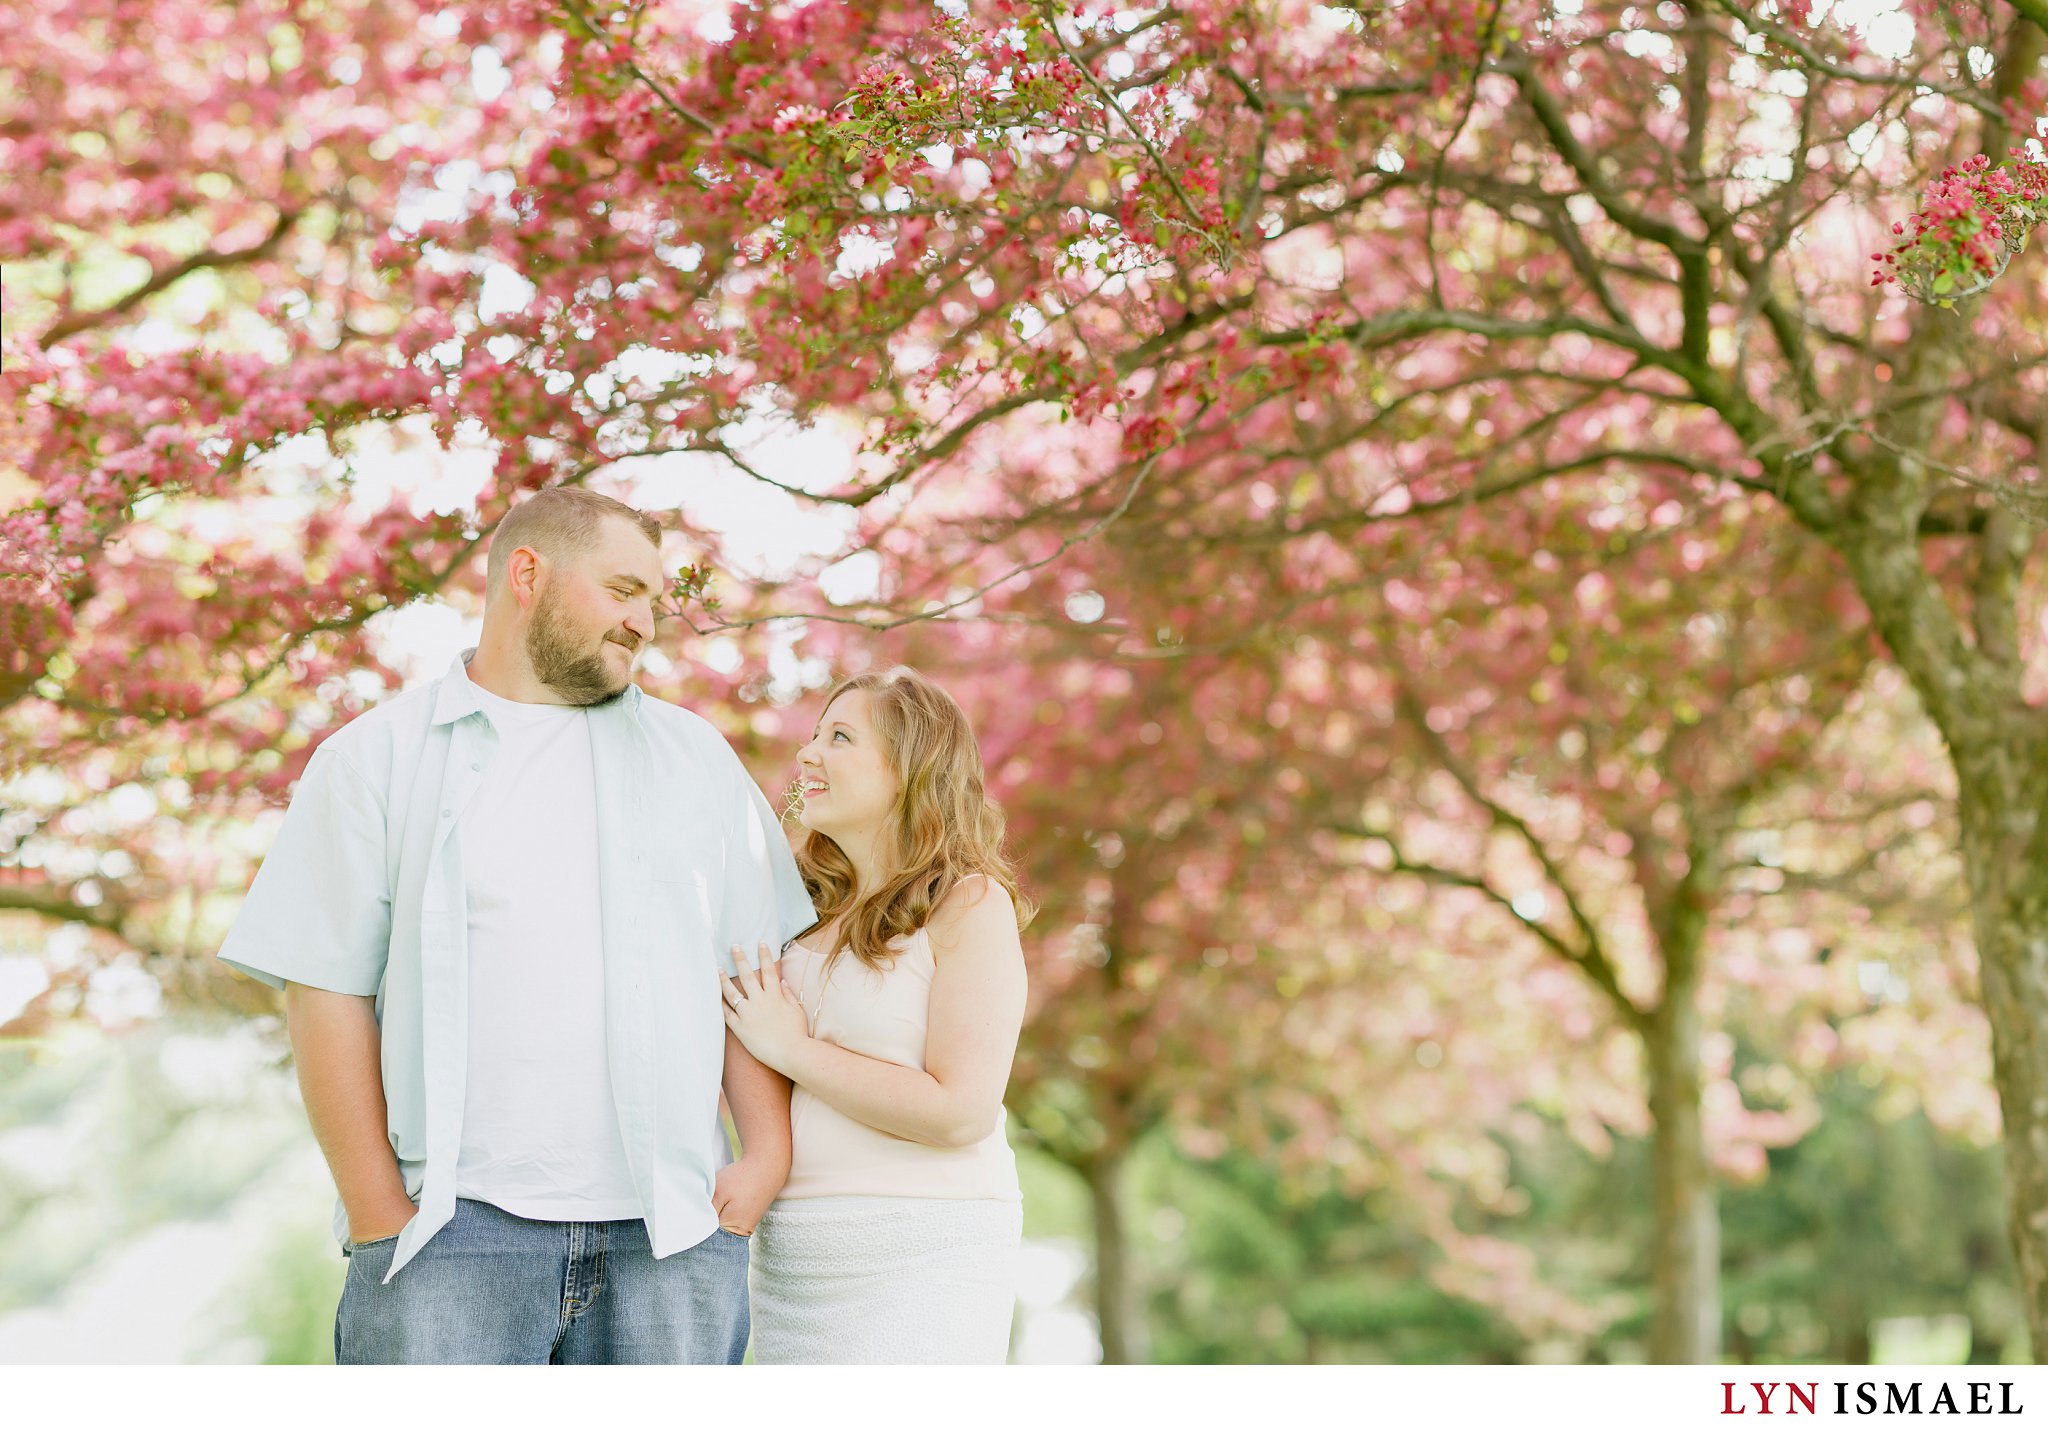 An engagement session under pink blossoms.